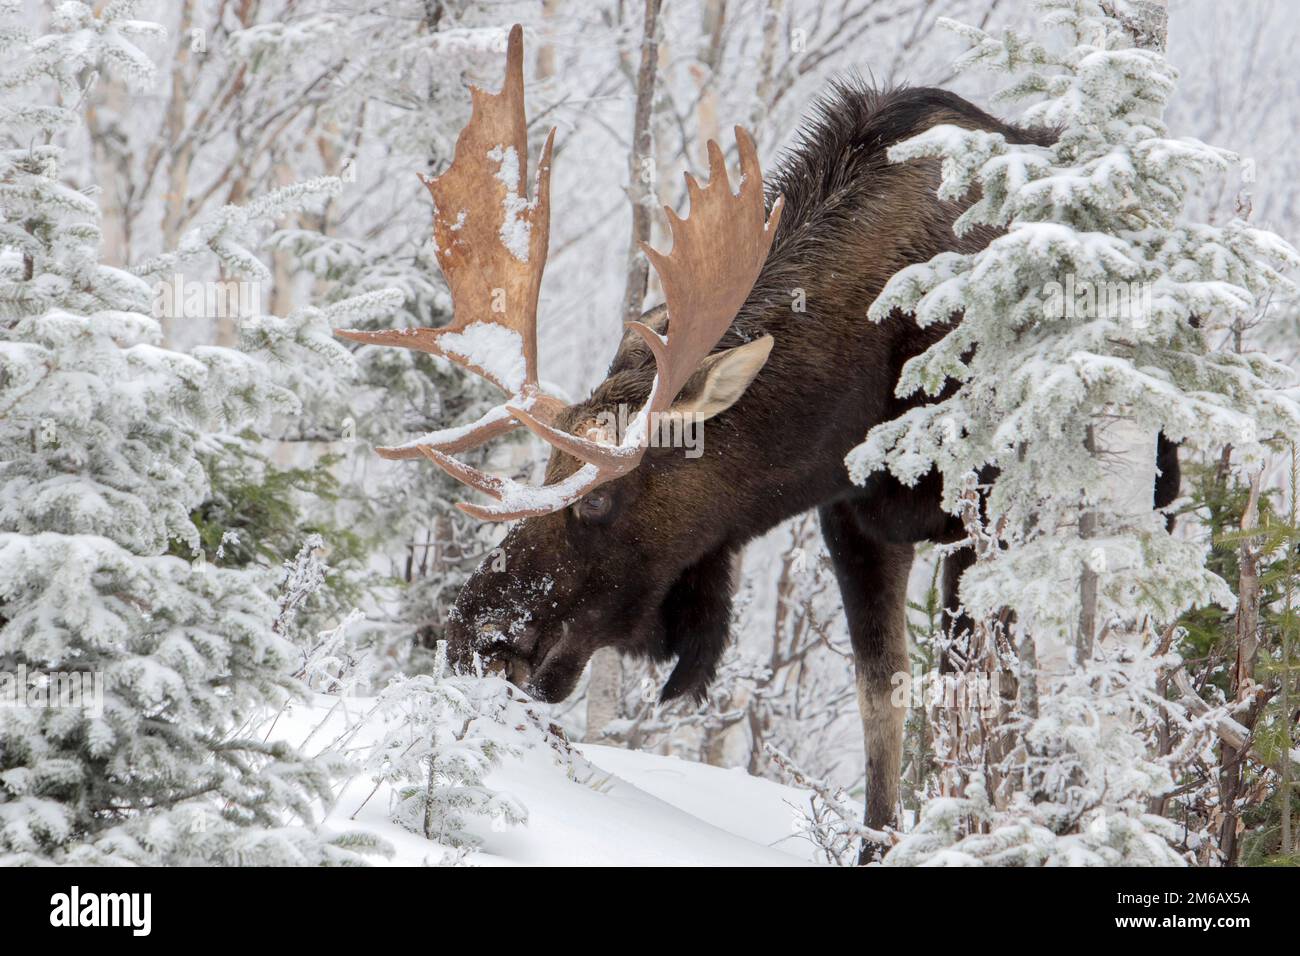 A buill moose with huge antlers eats balsam fir tree in a forest in winter. Alces americanus Stock Photo